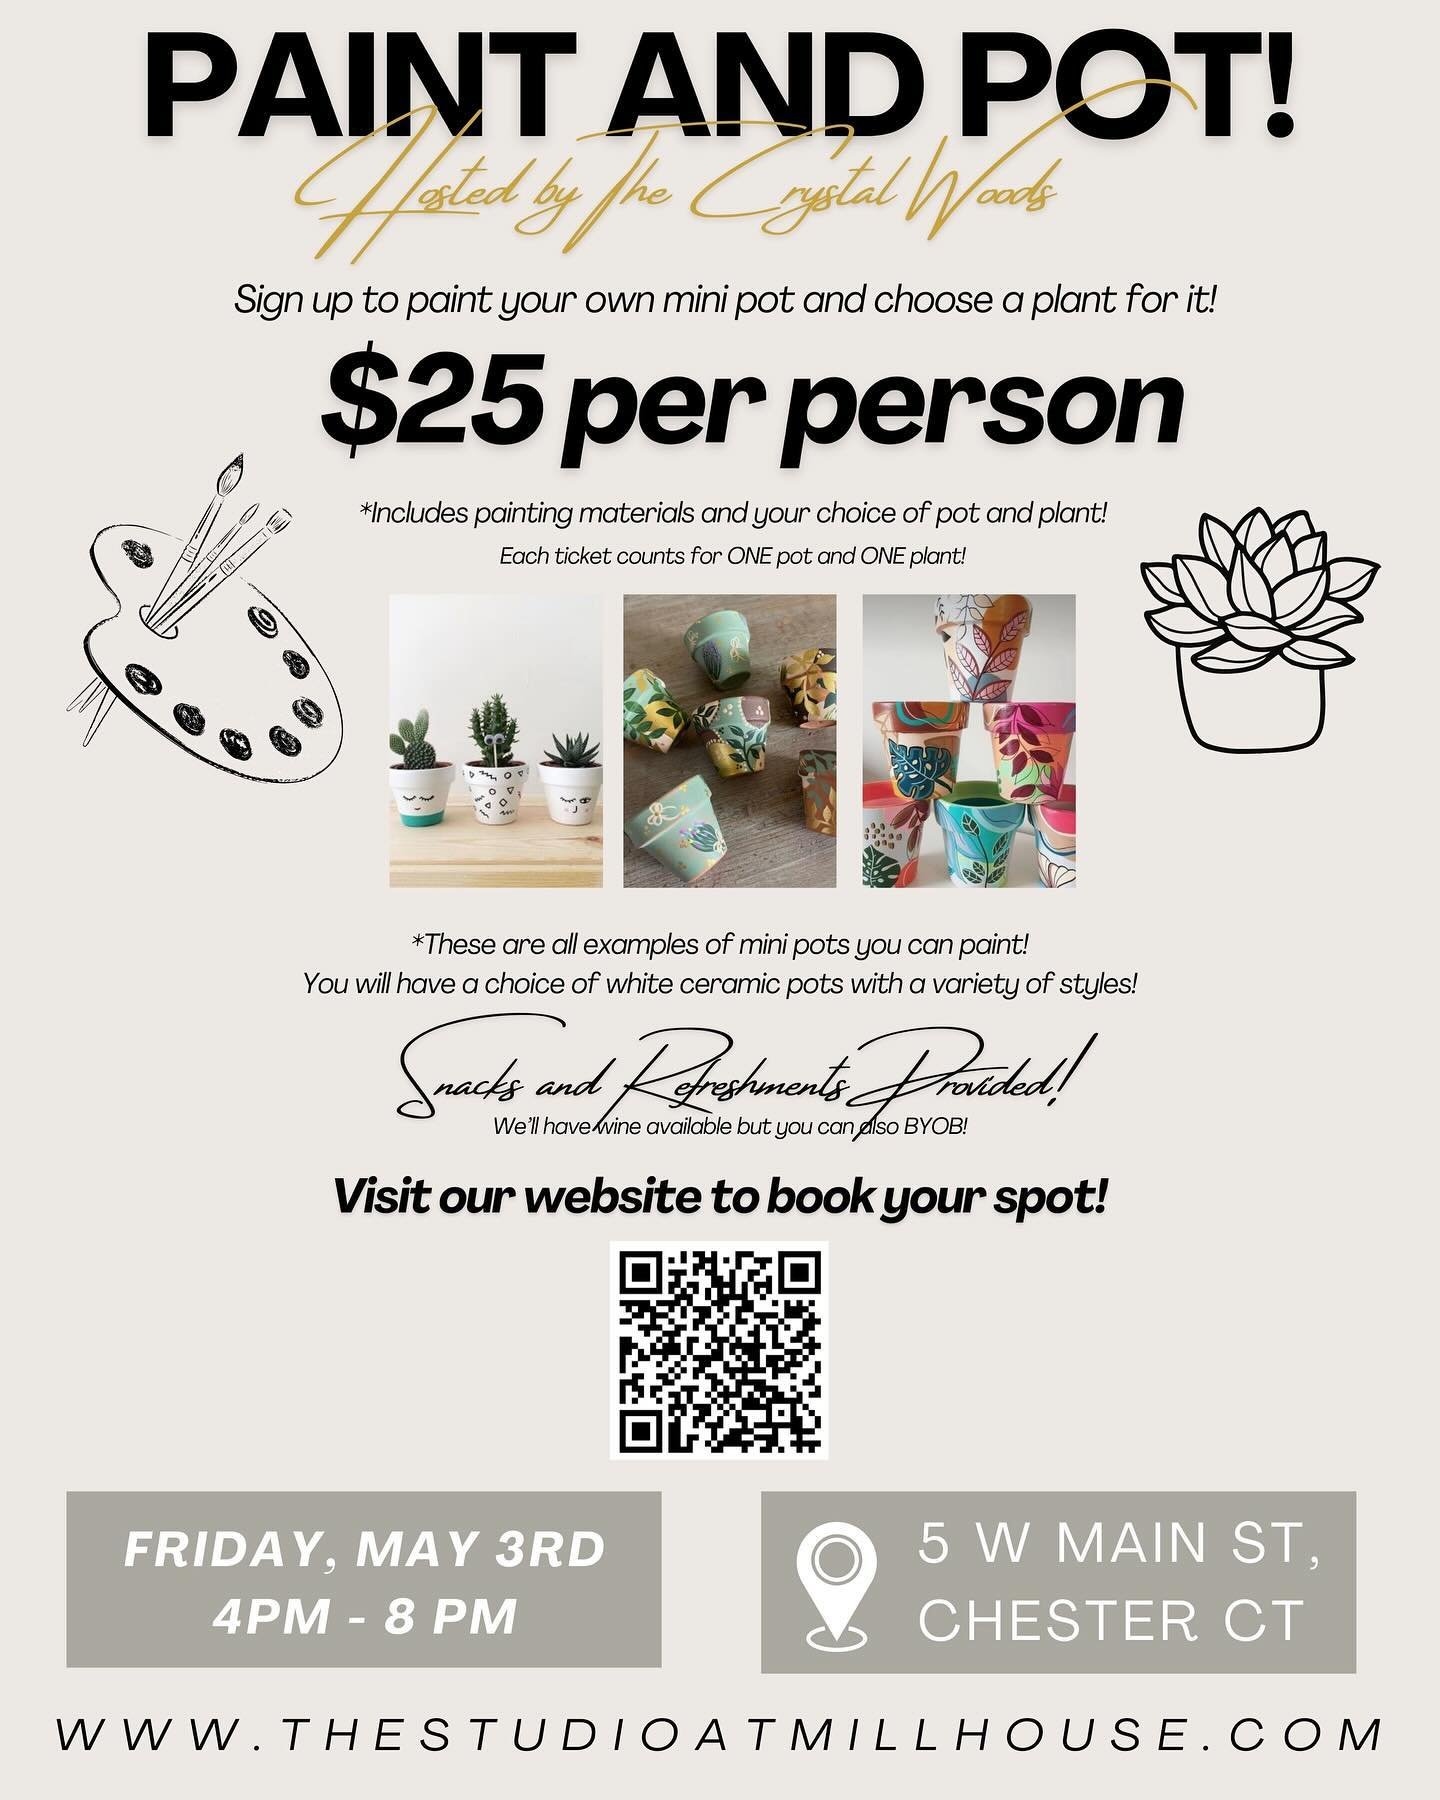 Reminder to book your spot for our Paint and Pot and Floral Mini Sessions!! 

Event is Friday, May 3rd! There&rsquo;s still some spots left for both!! Click the link in our bio to book! Hopefully we&rsquo;ll see you there! 🪴💐
.
.
.
.
.
#ctevents #c